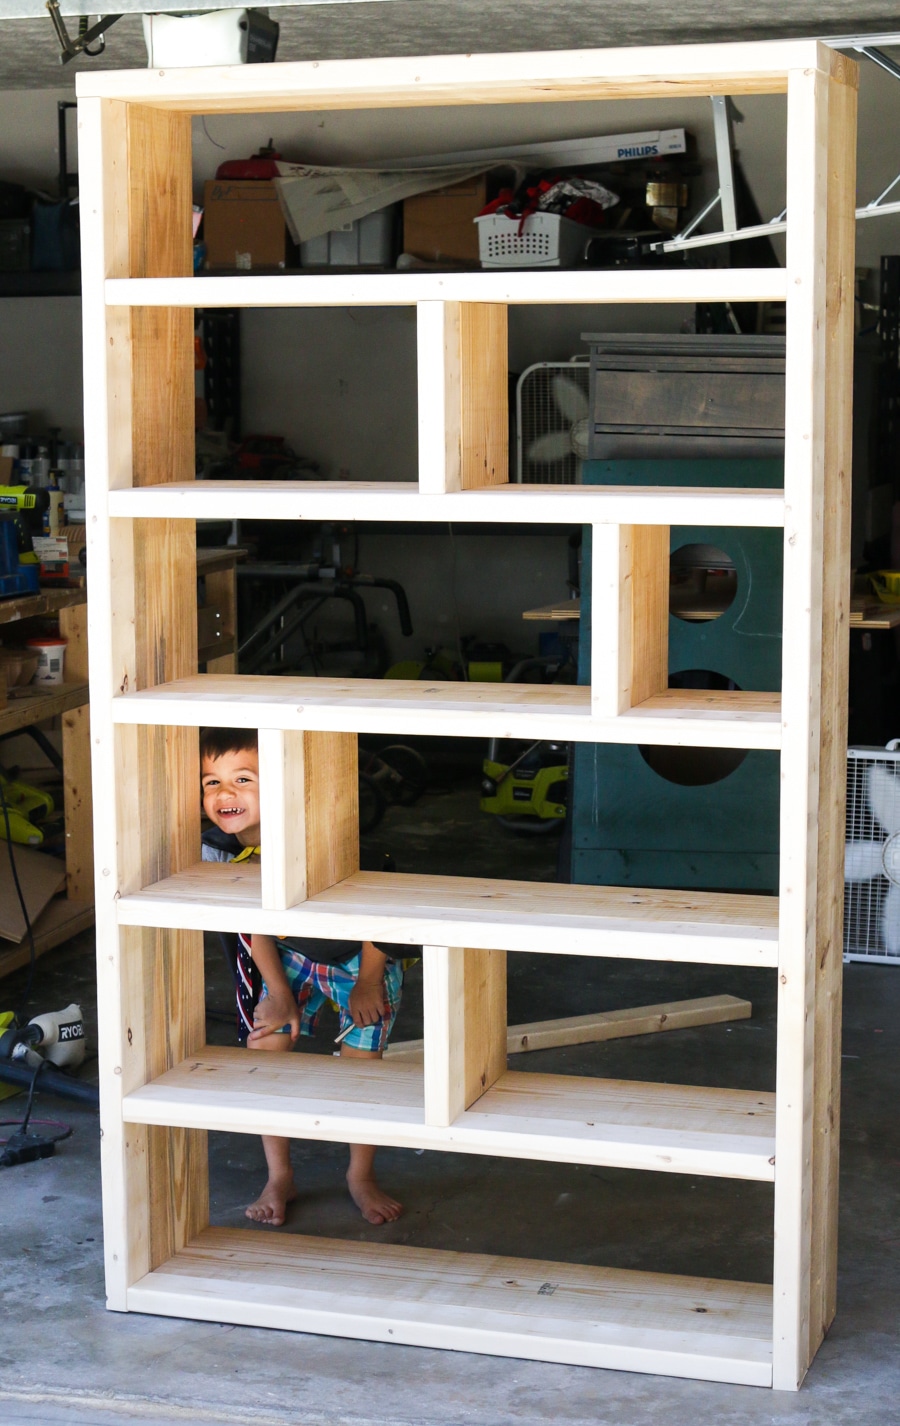 Tutorial and free plans on how to build a DIY rustic bookshelf with crates and reclaimed pallets